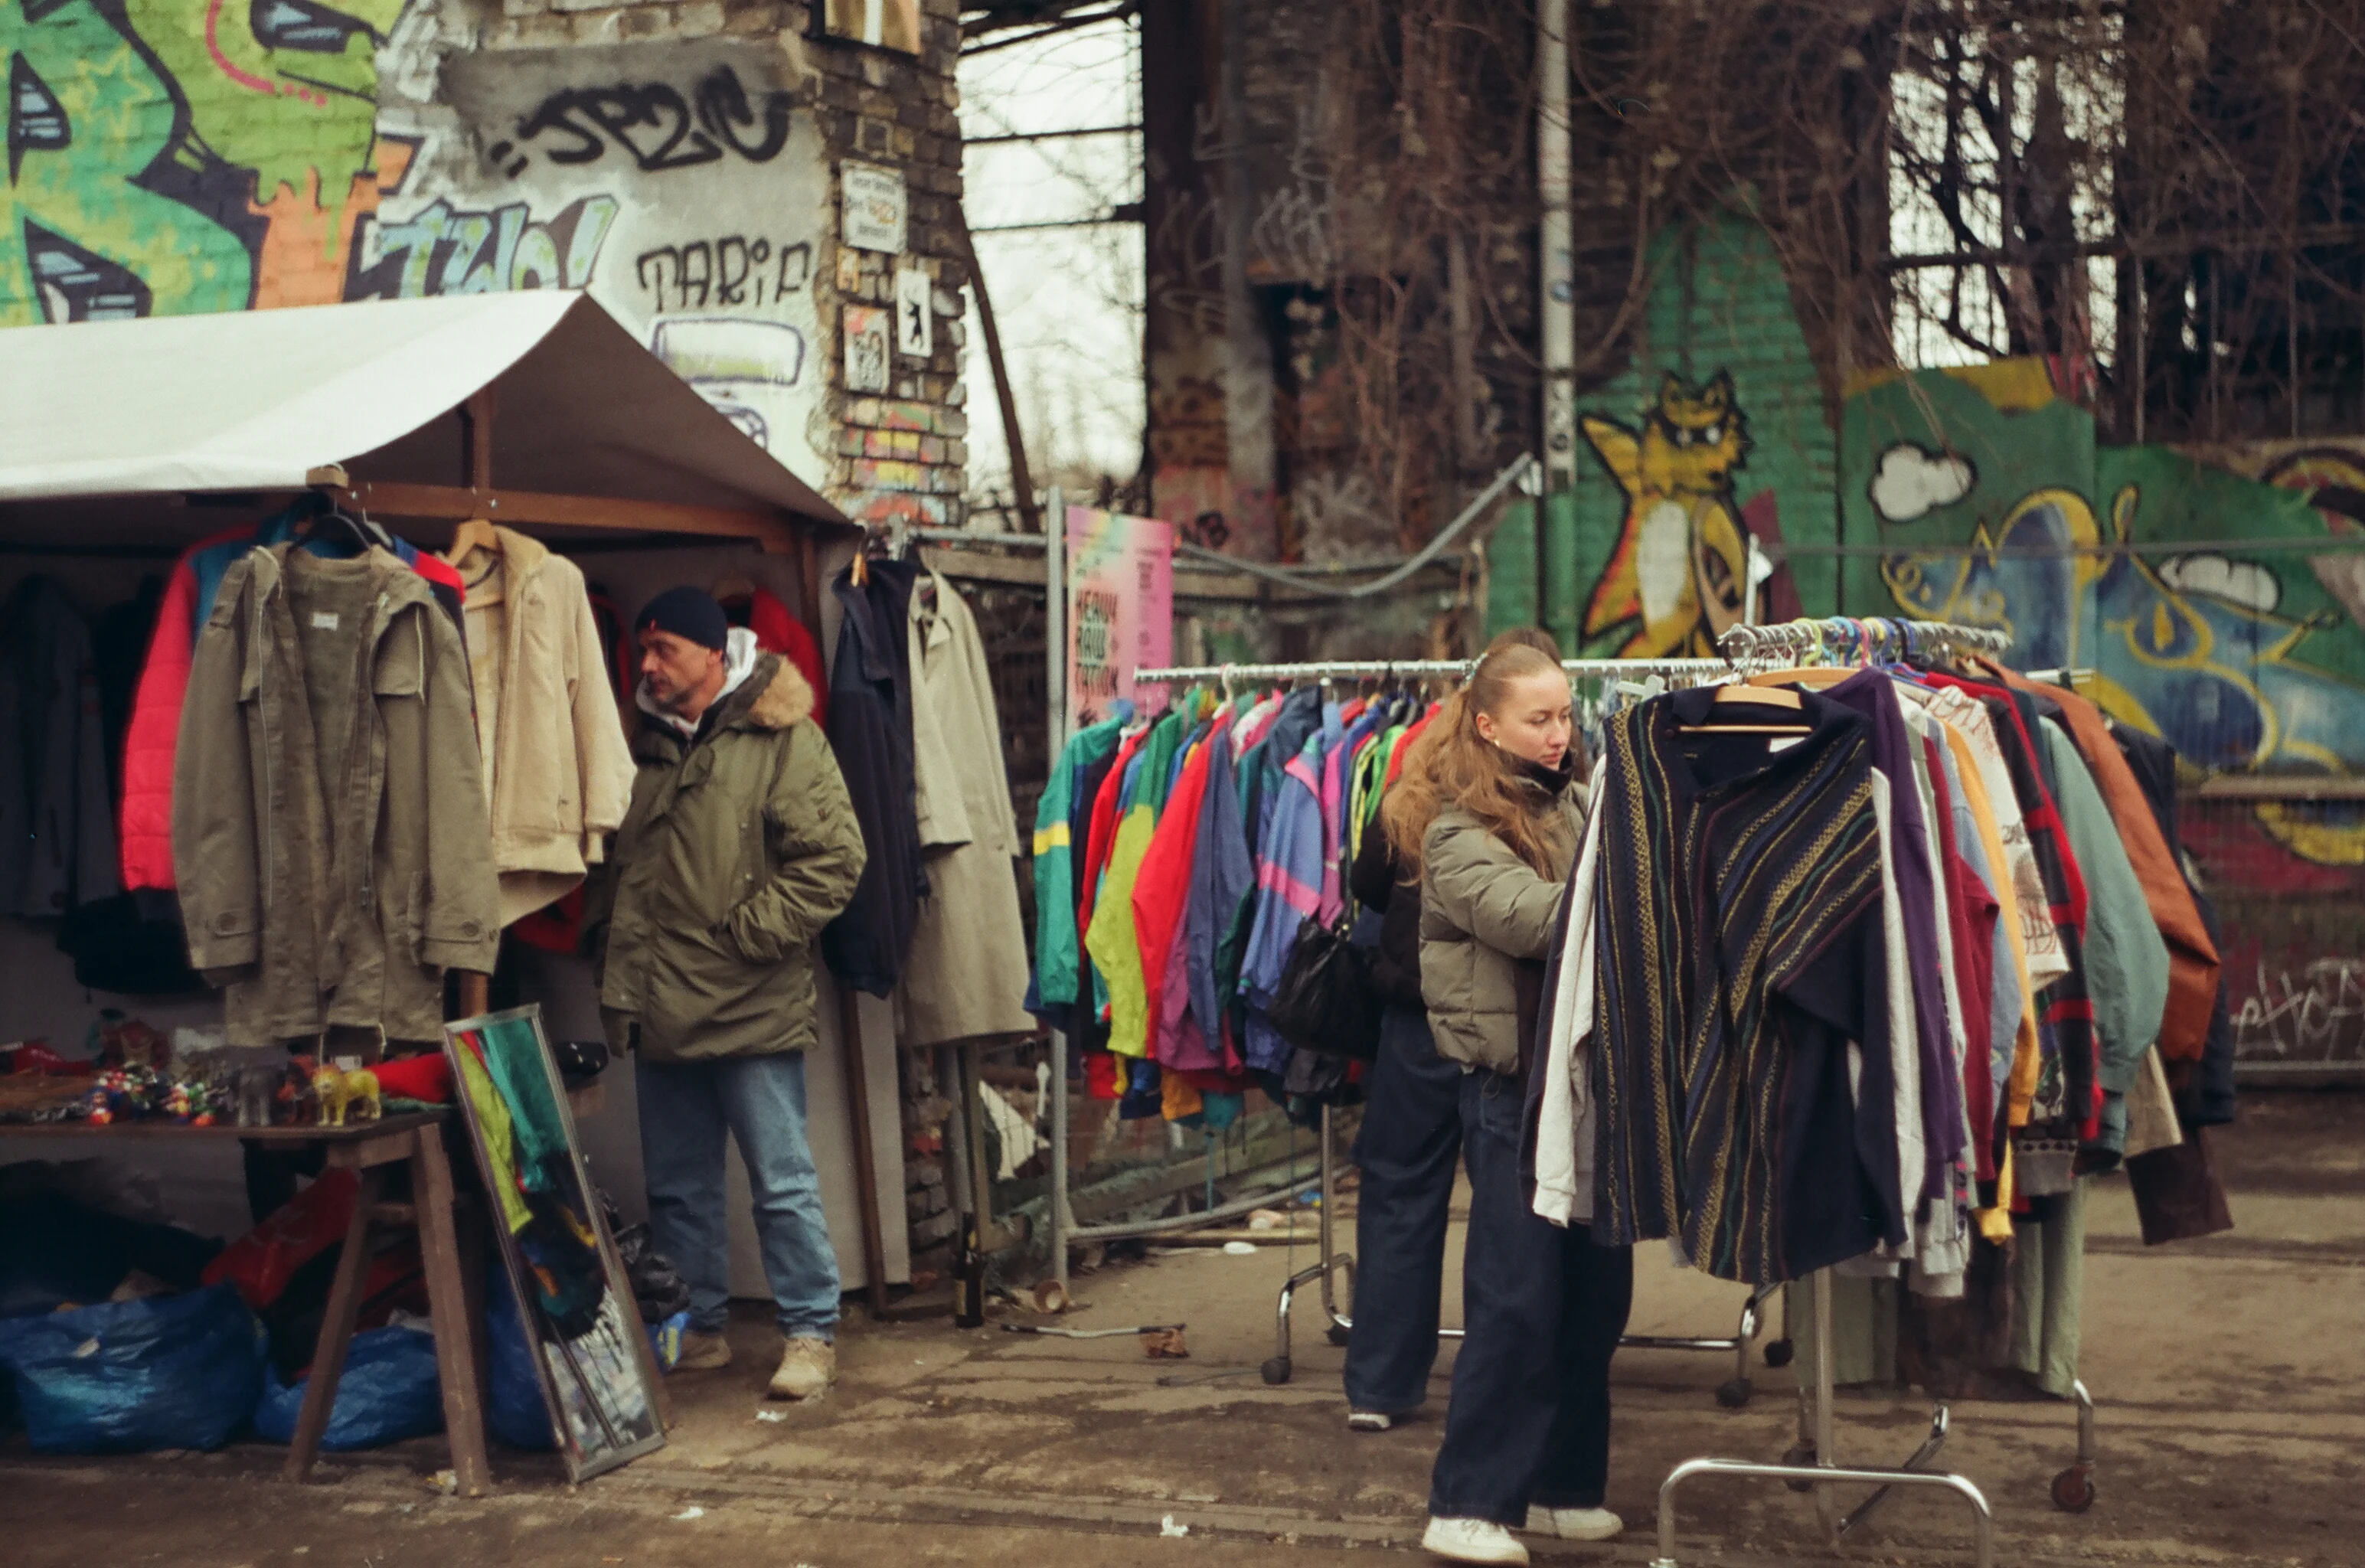 People looking at clothes at a flea market